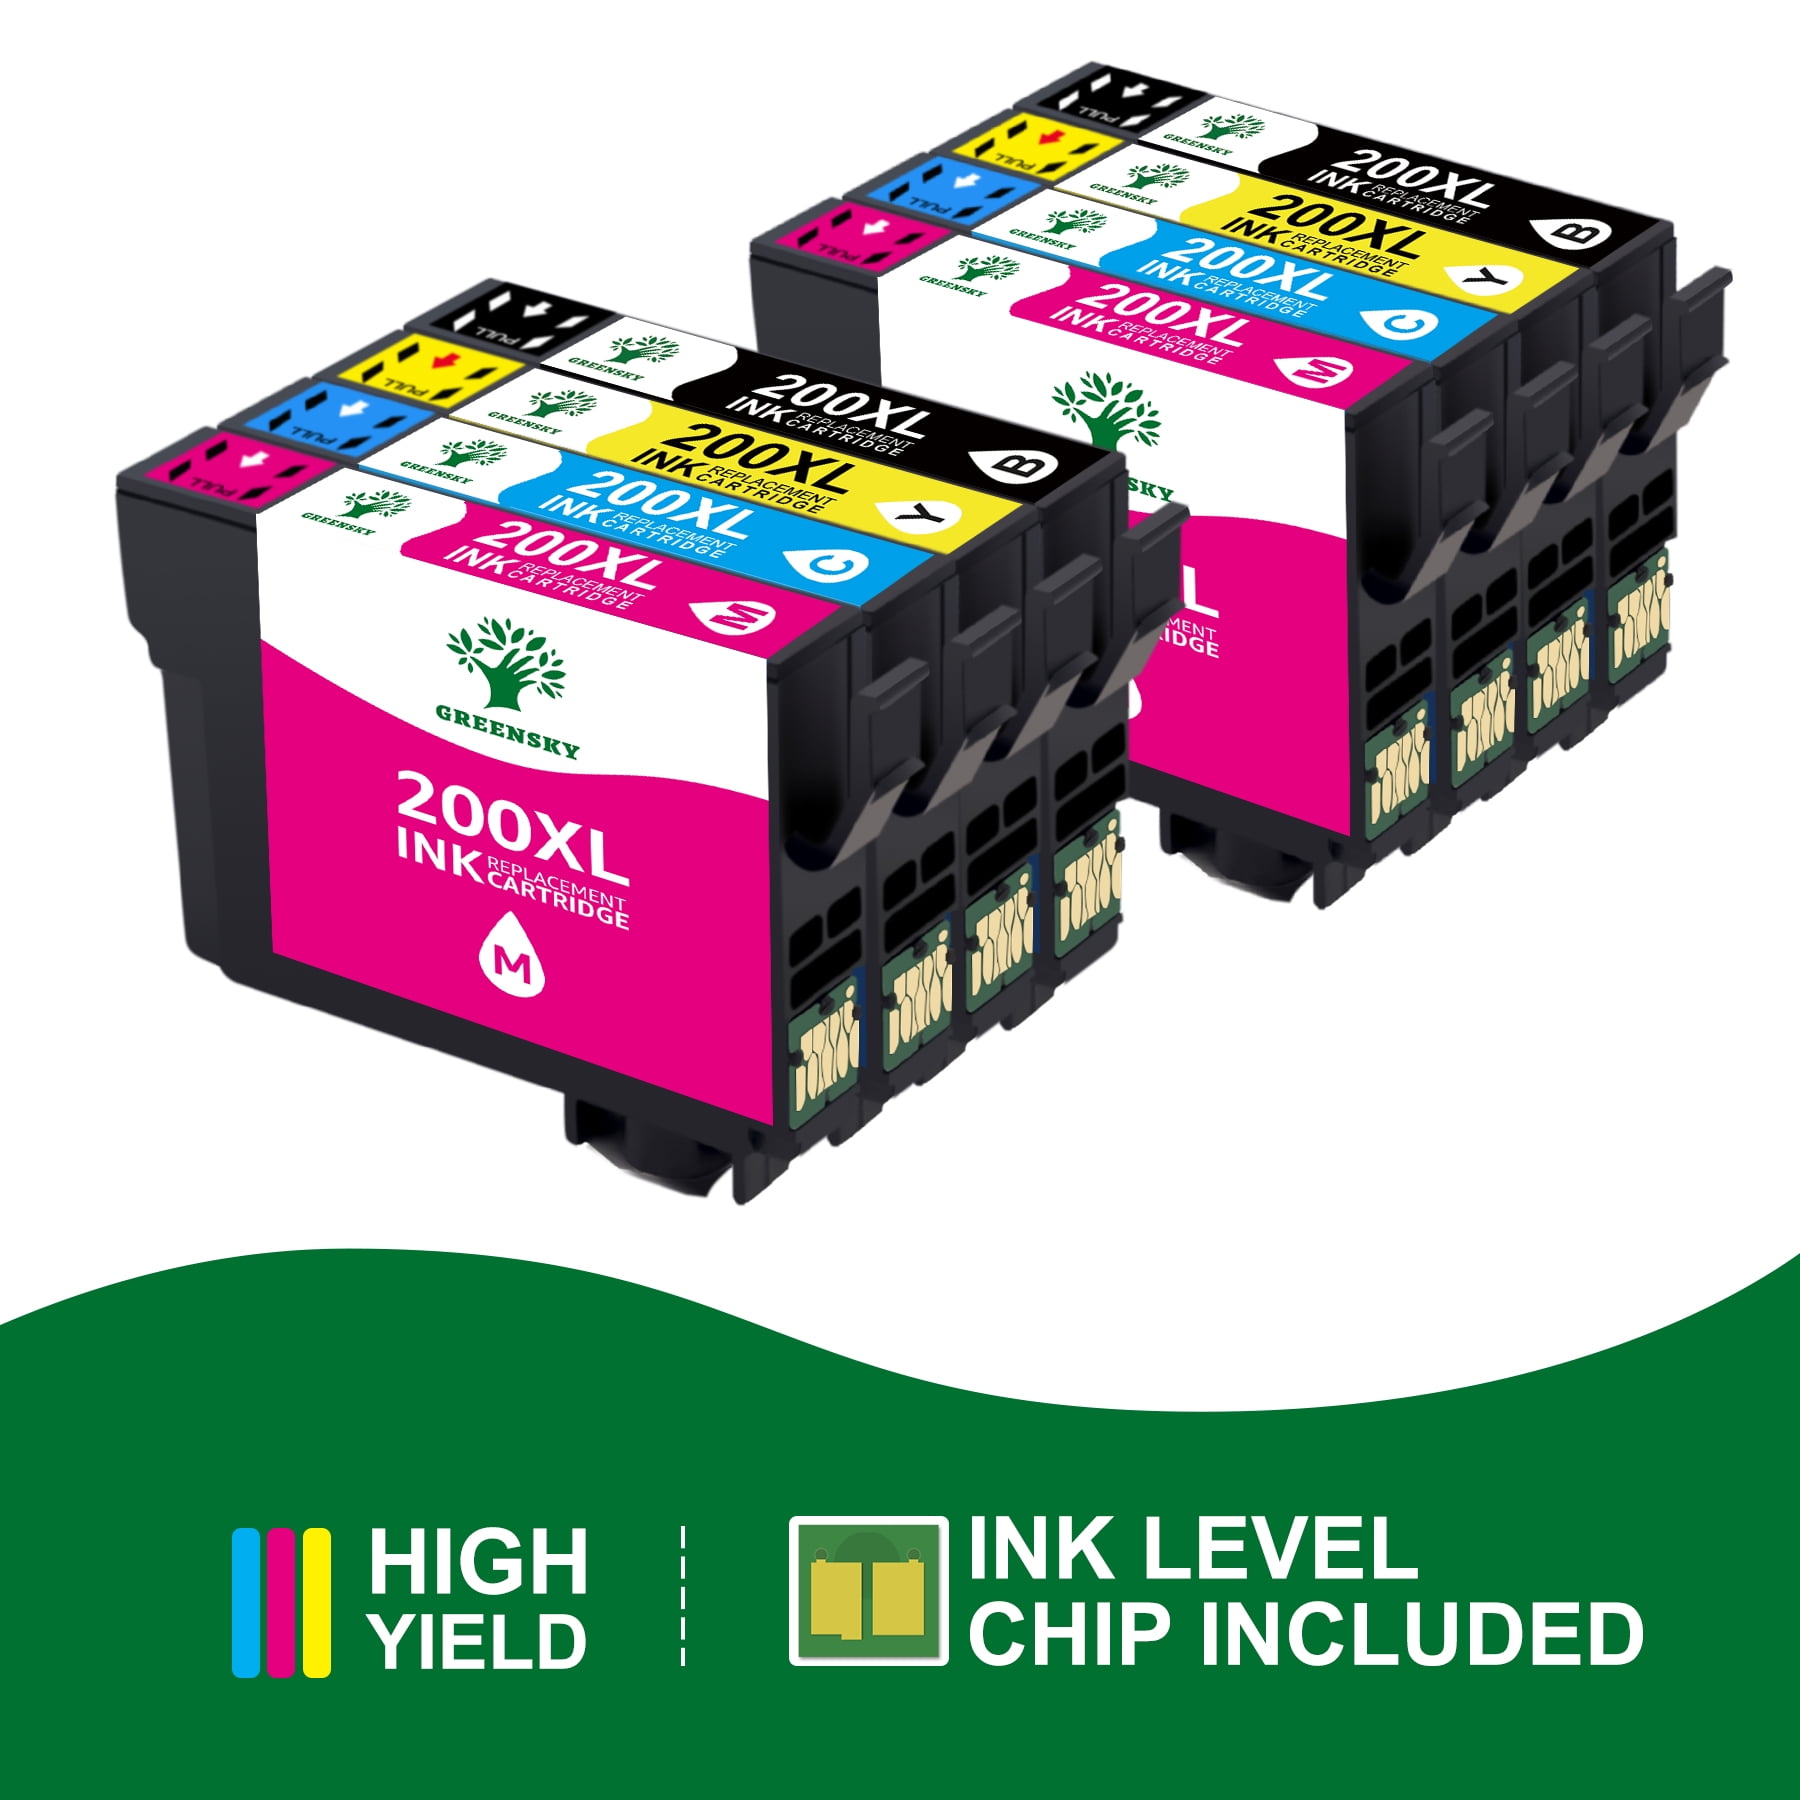 Greensky 200xl Ink Cartridge Replacement For Epson 200xl 200 200 Xl T200 Combo Pack For Xp 410 4463